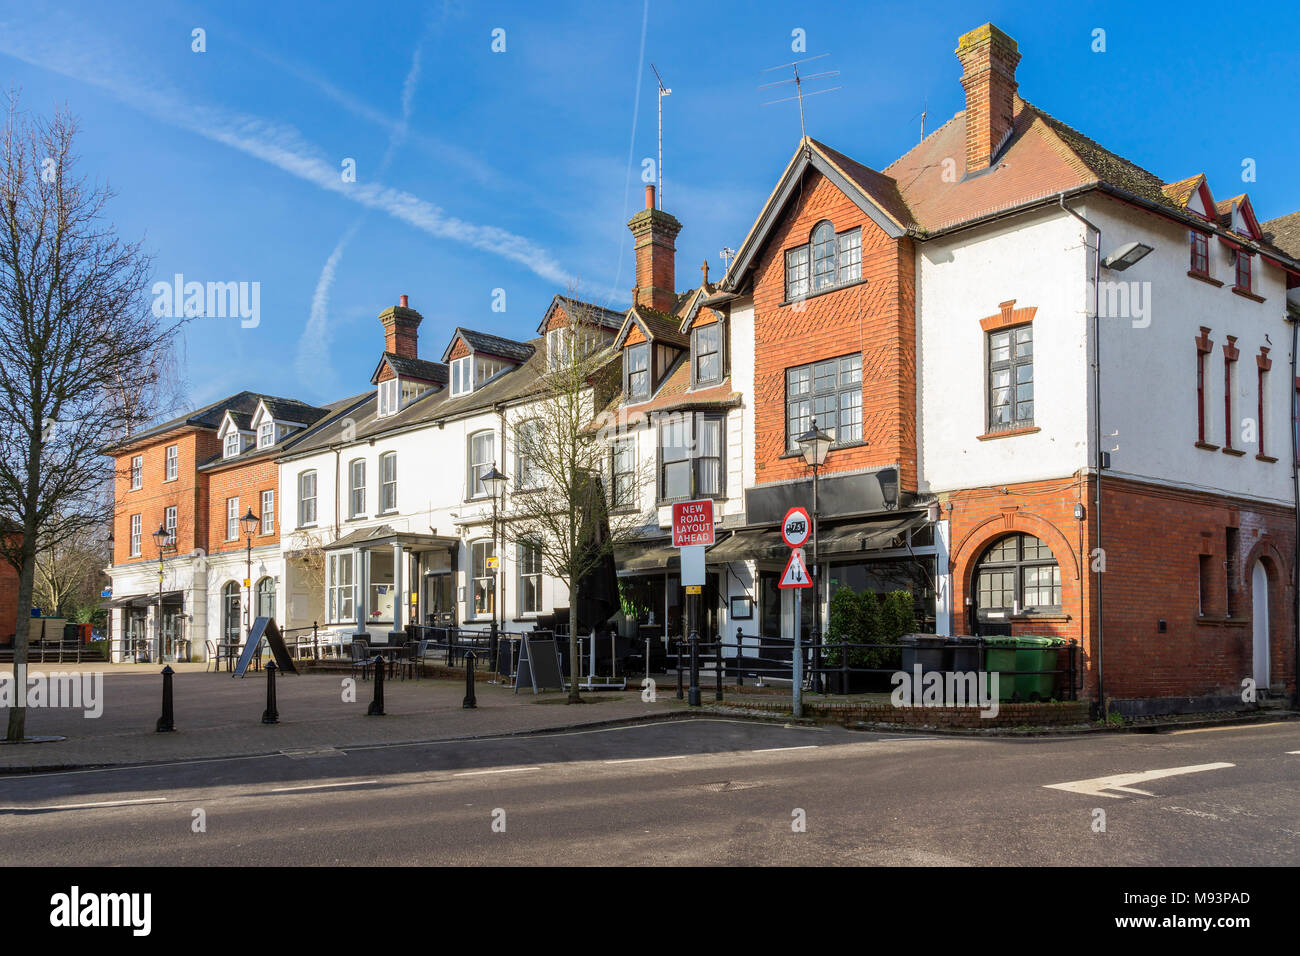 The Market Town of Alton in central Hampshire, southern UK. Stock Photo